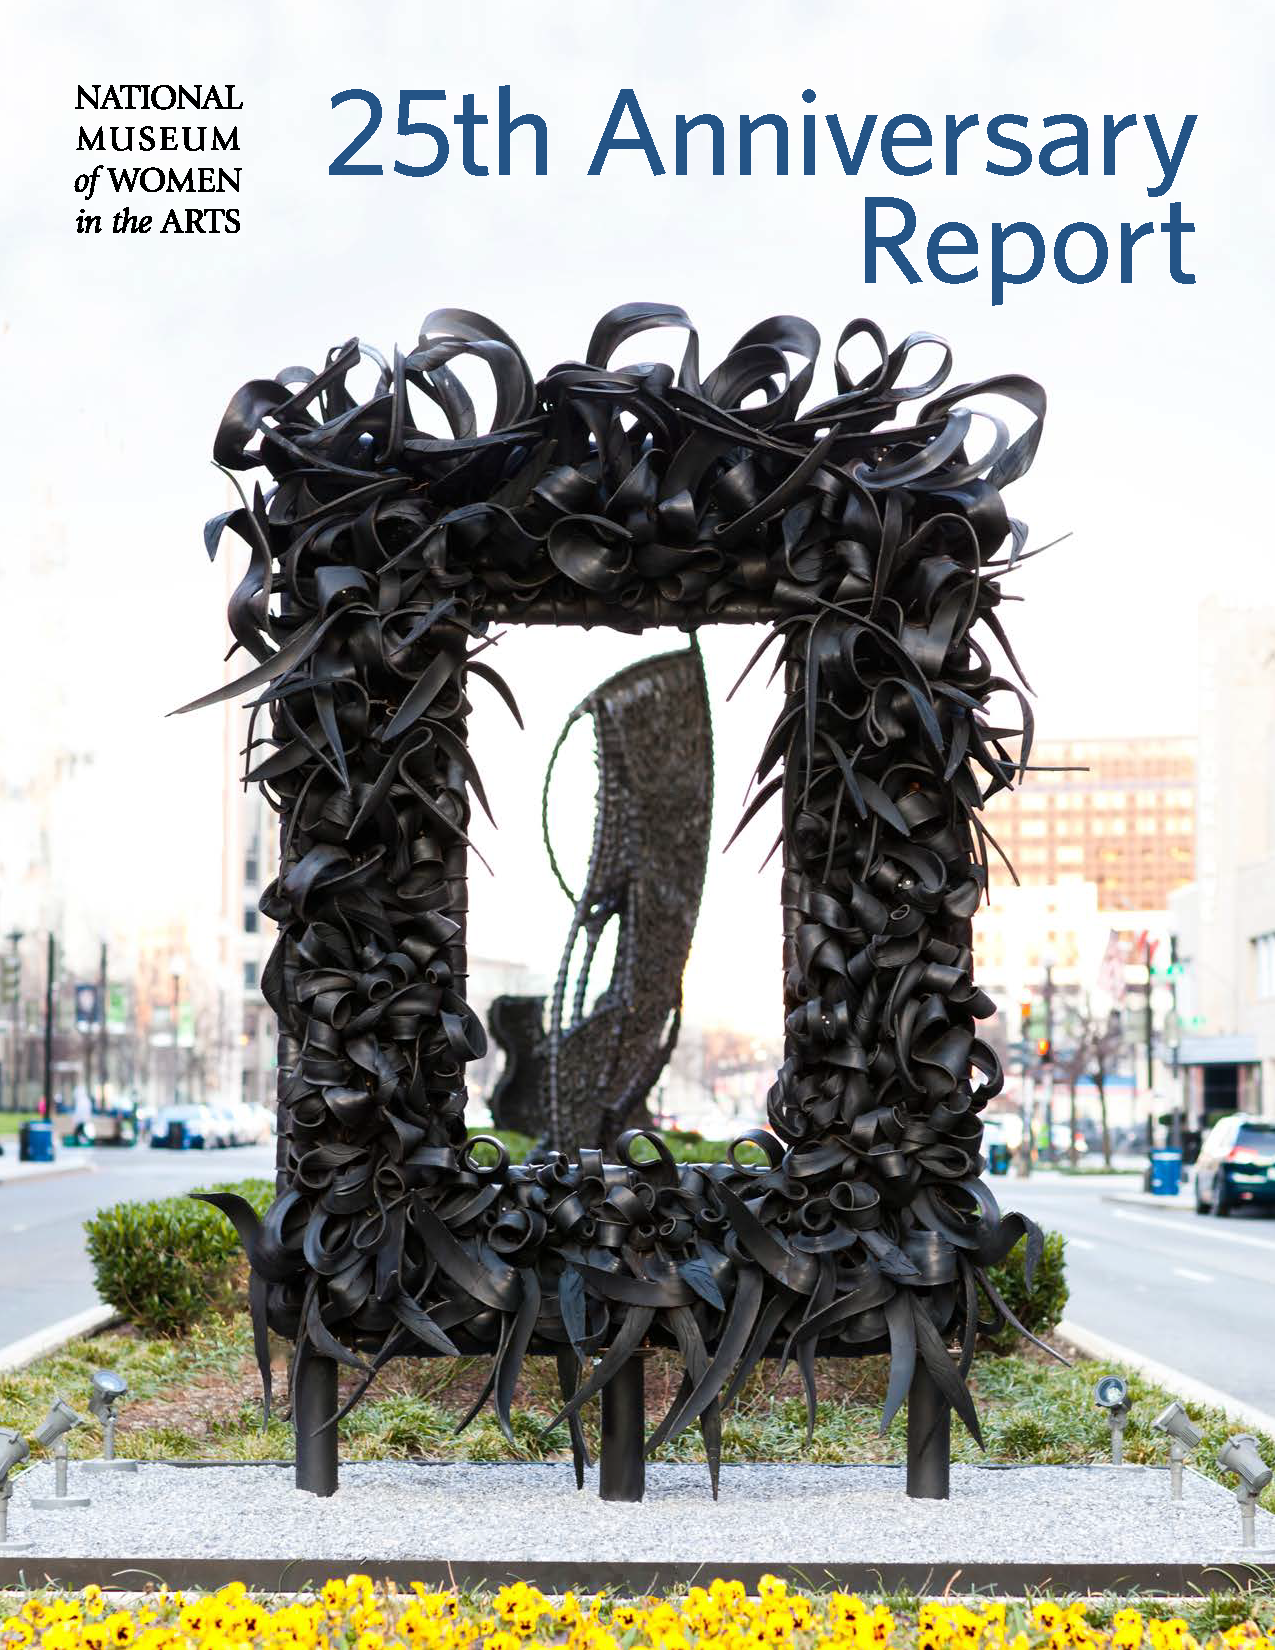 Cover of the 2013 annual report shows a large sculpture made of cut and shaped tires in the shape of a picture frame with the text '25th Anniversary Report'